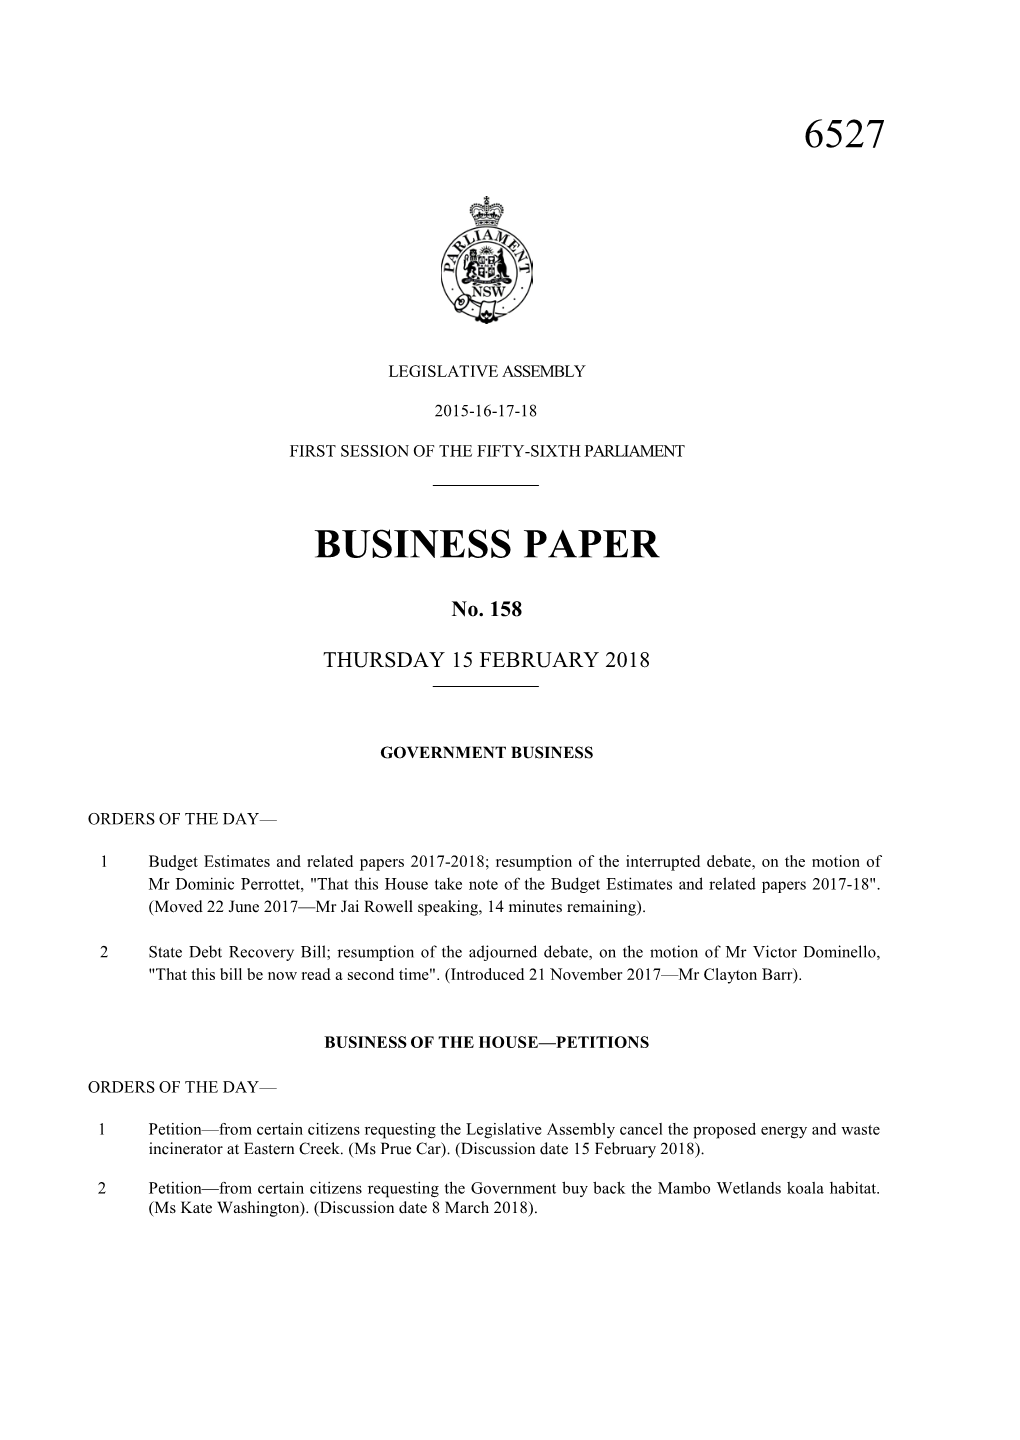 6527 Business Paper